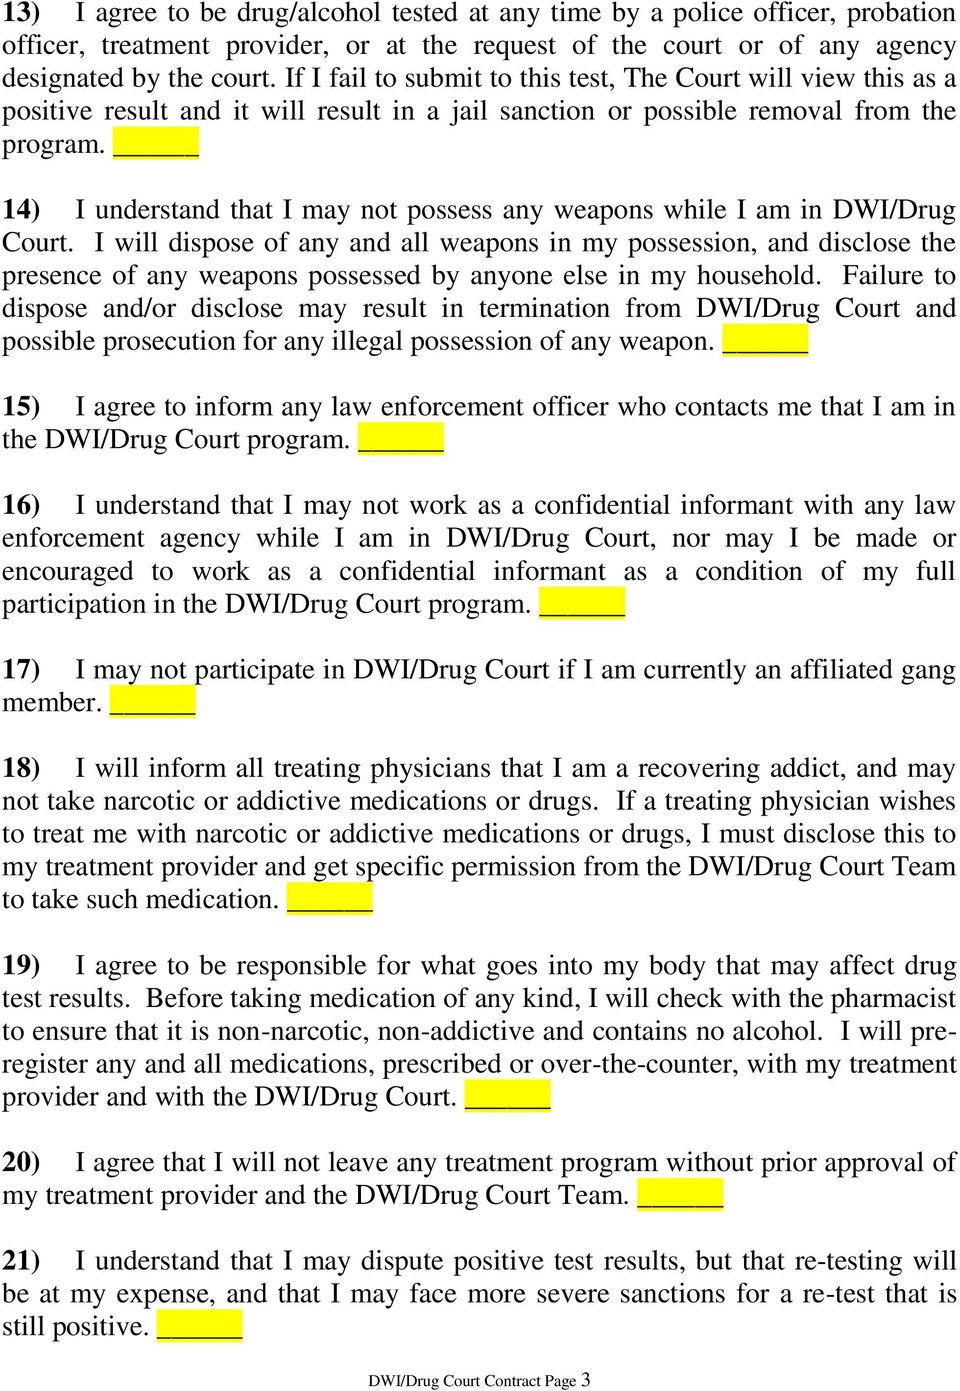 14) I understand that I may not possess any weapons while I am in DWI/Drug Court.